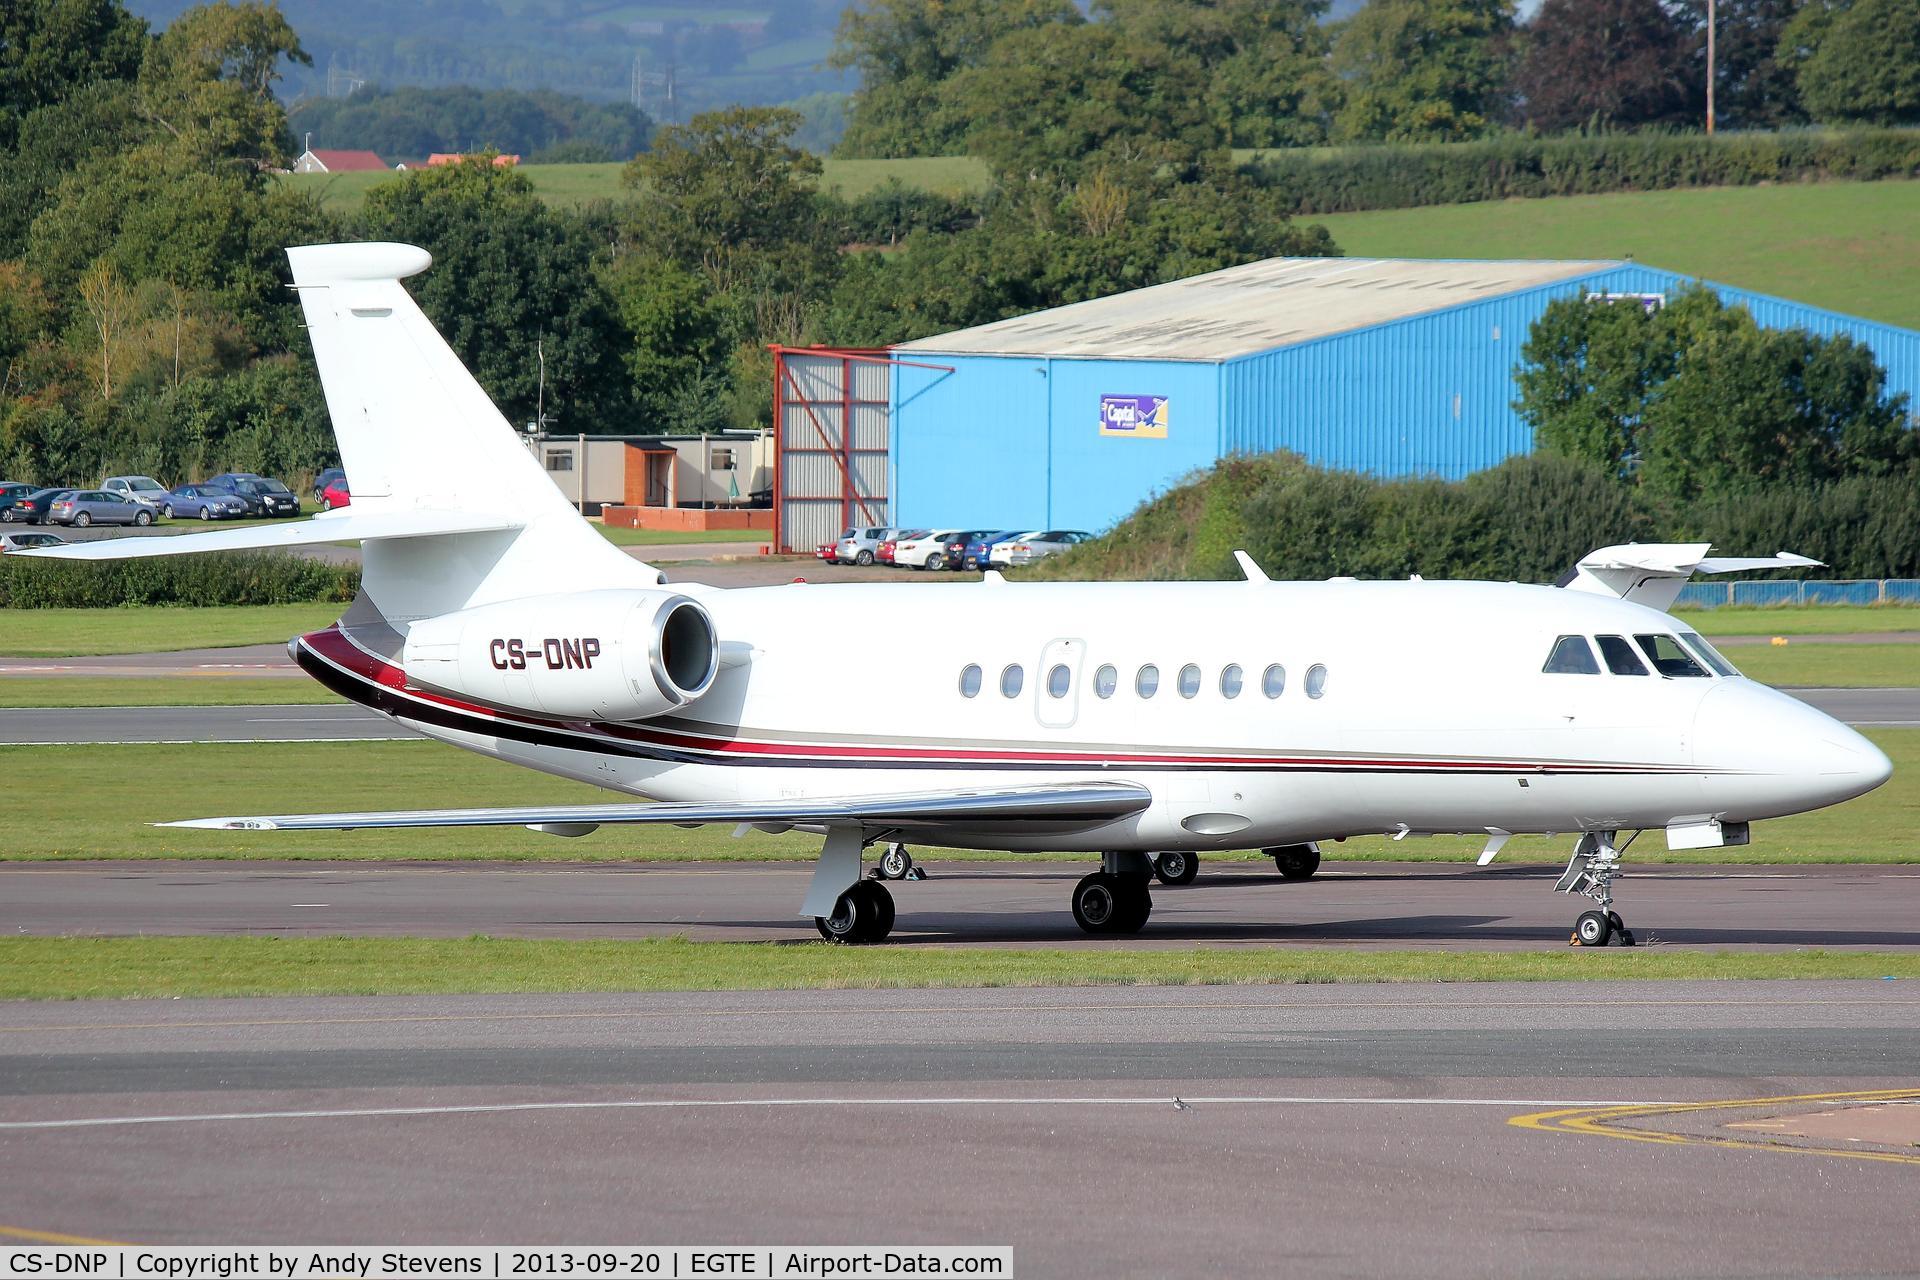 CS-DNP, 2000 Dassault Falcon 2000 C/N 109, Parked on the South Apron at Exeter